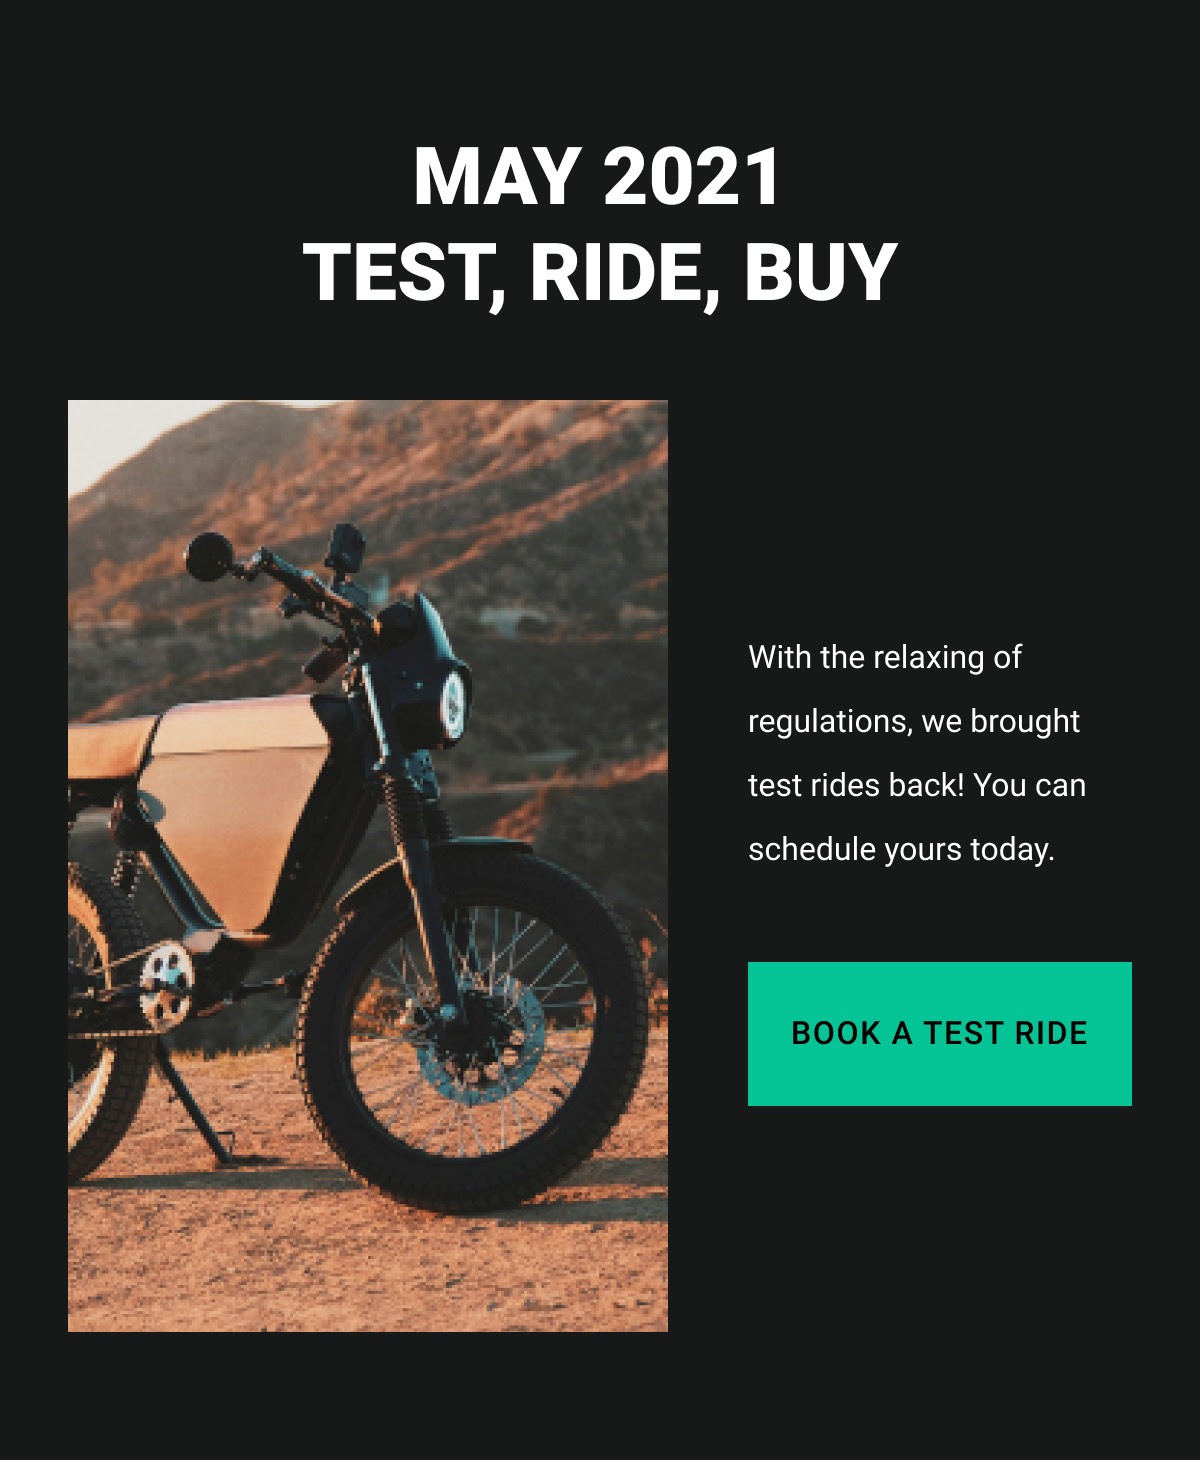 May 2021: Test, Ride, Buy